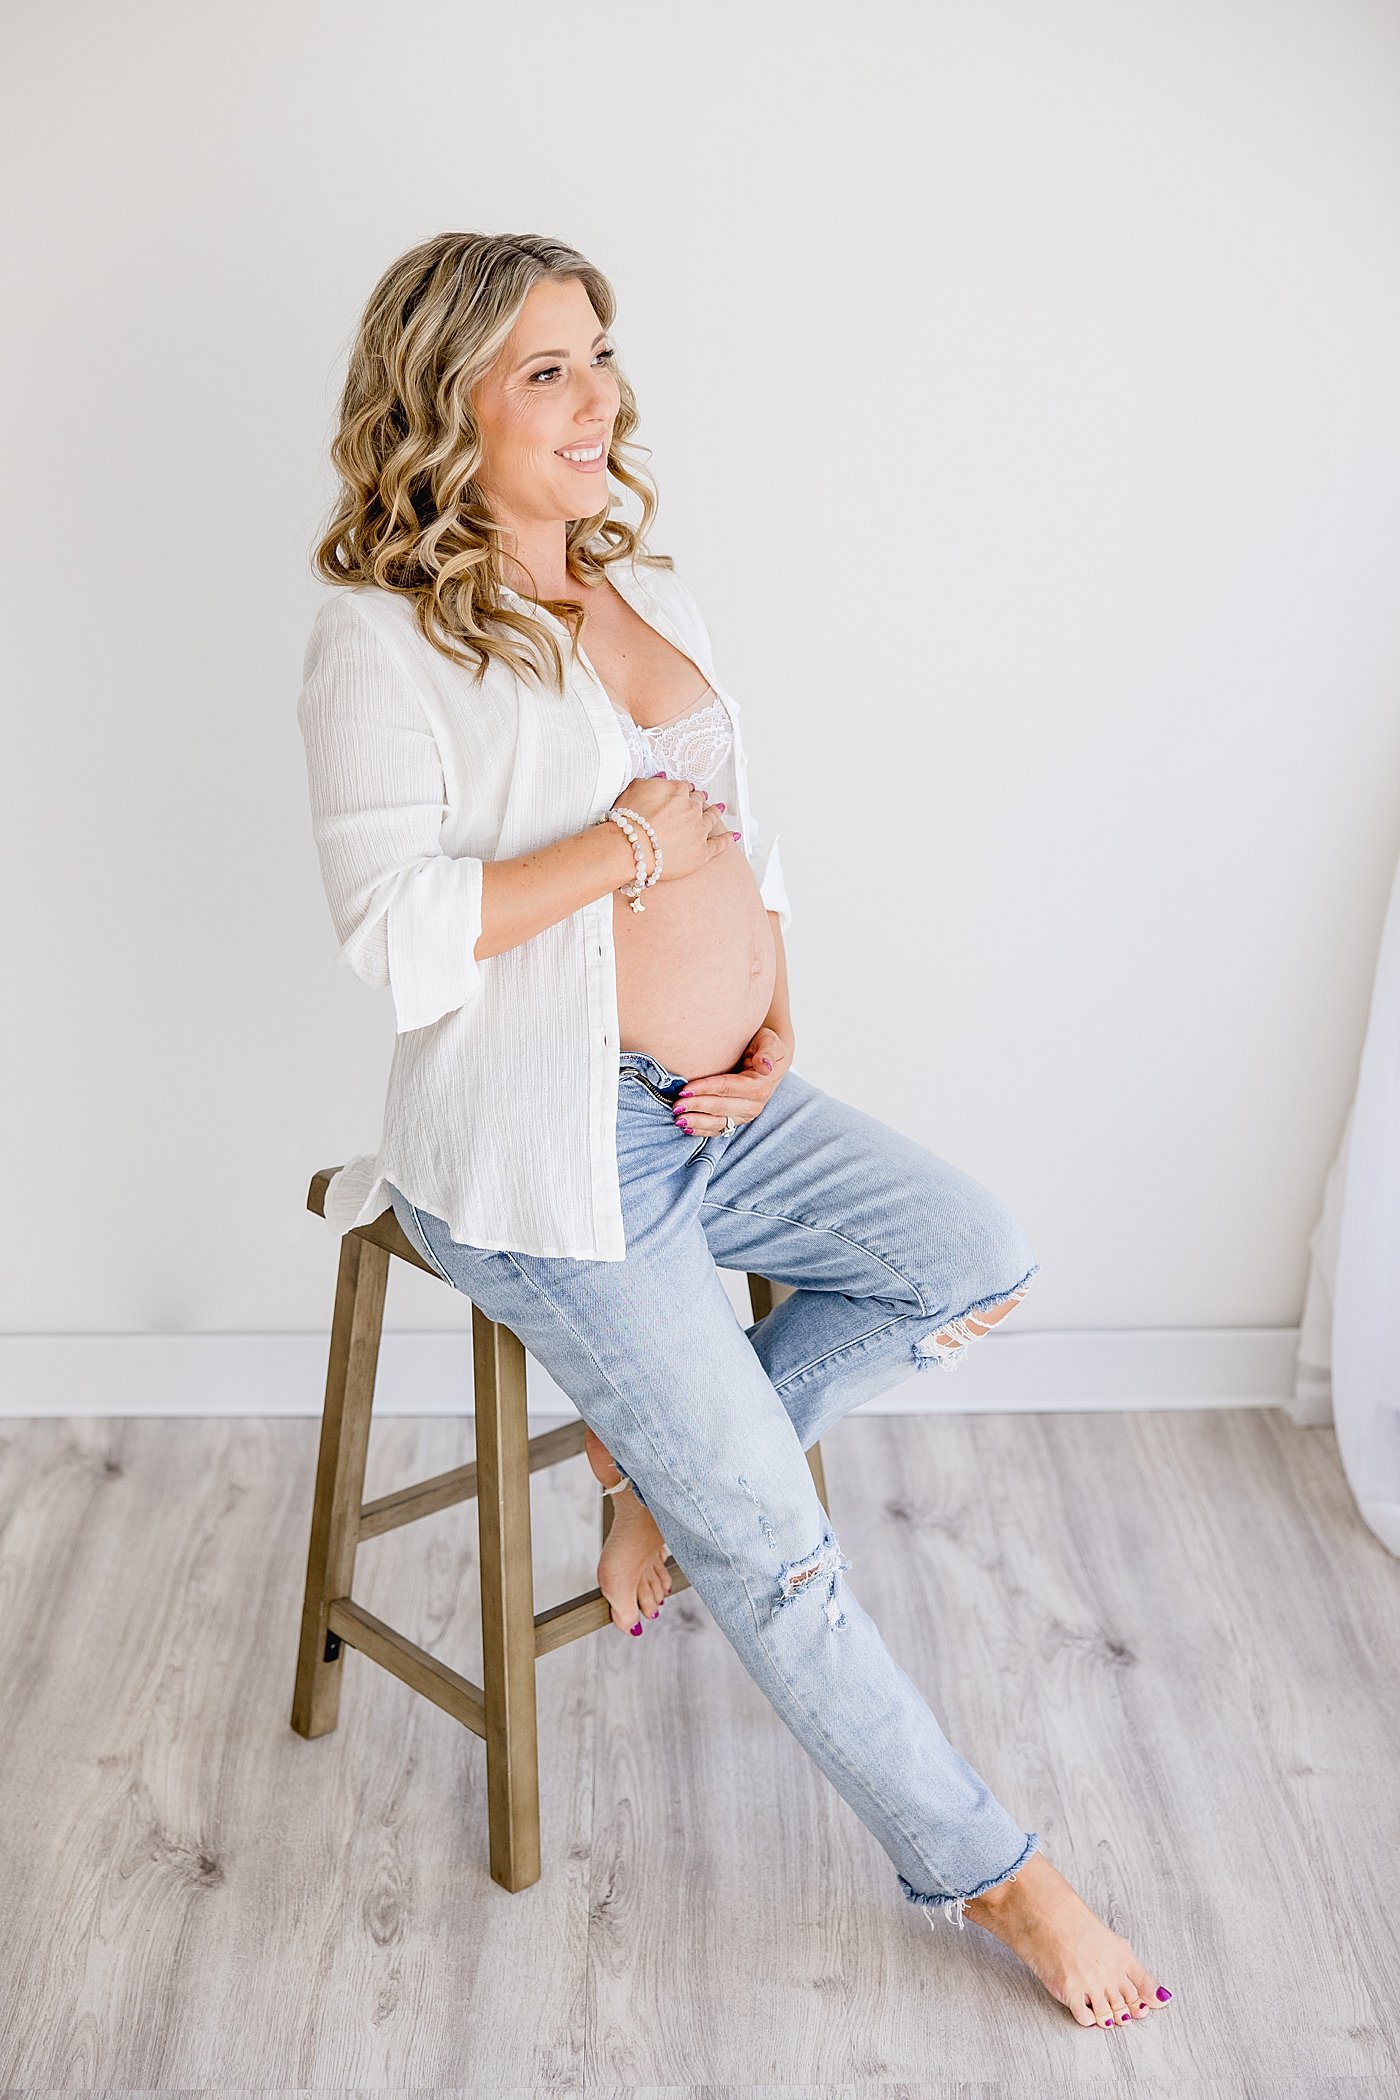 Newport Beach Maternity Session with Ambre Williams Photography